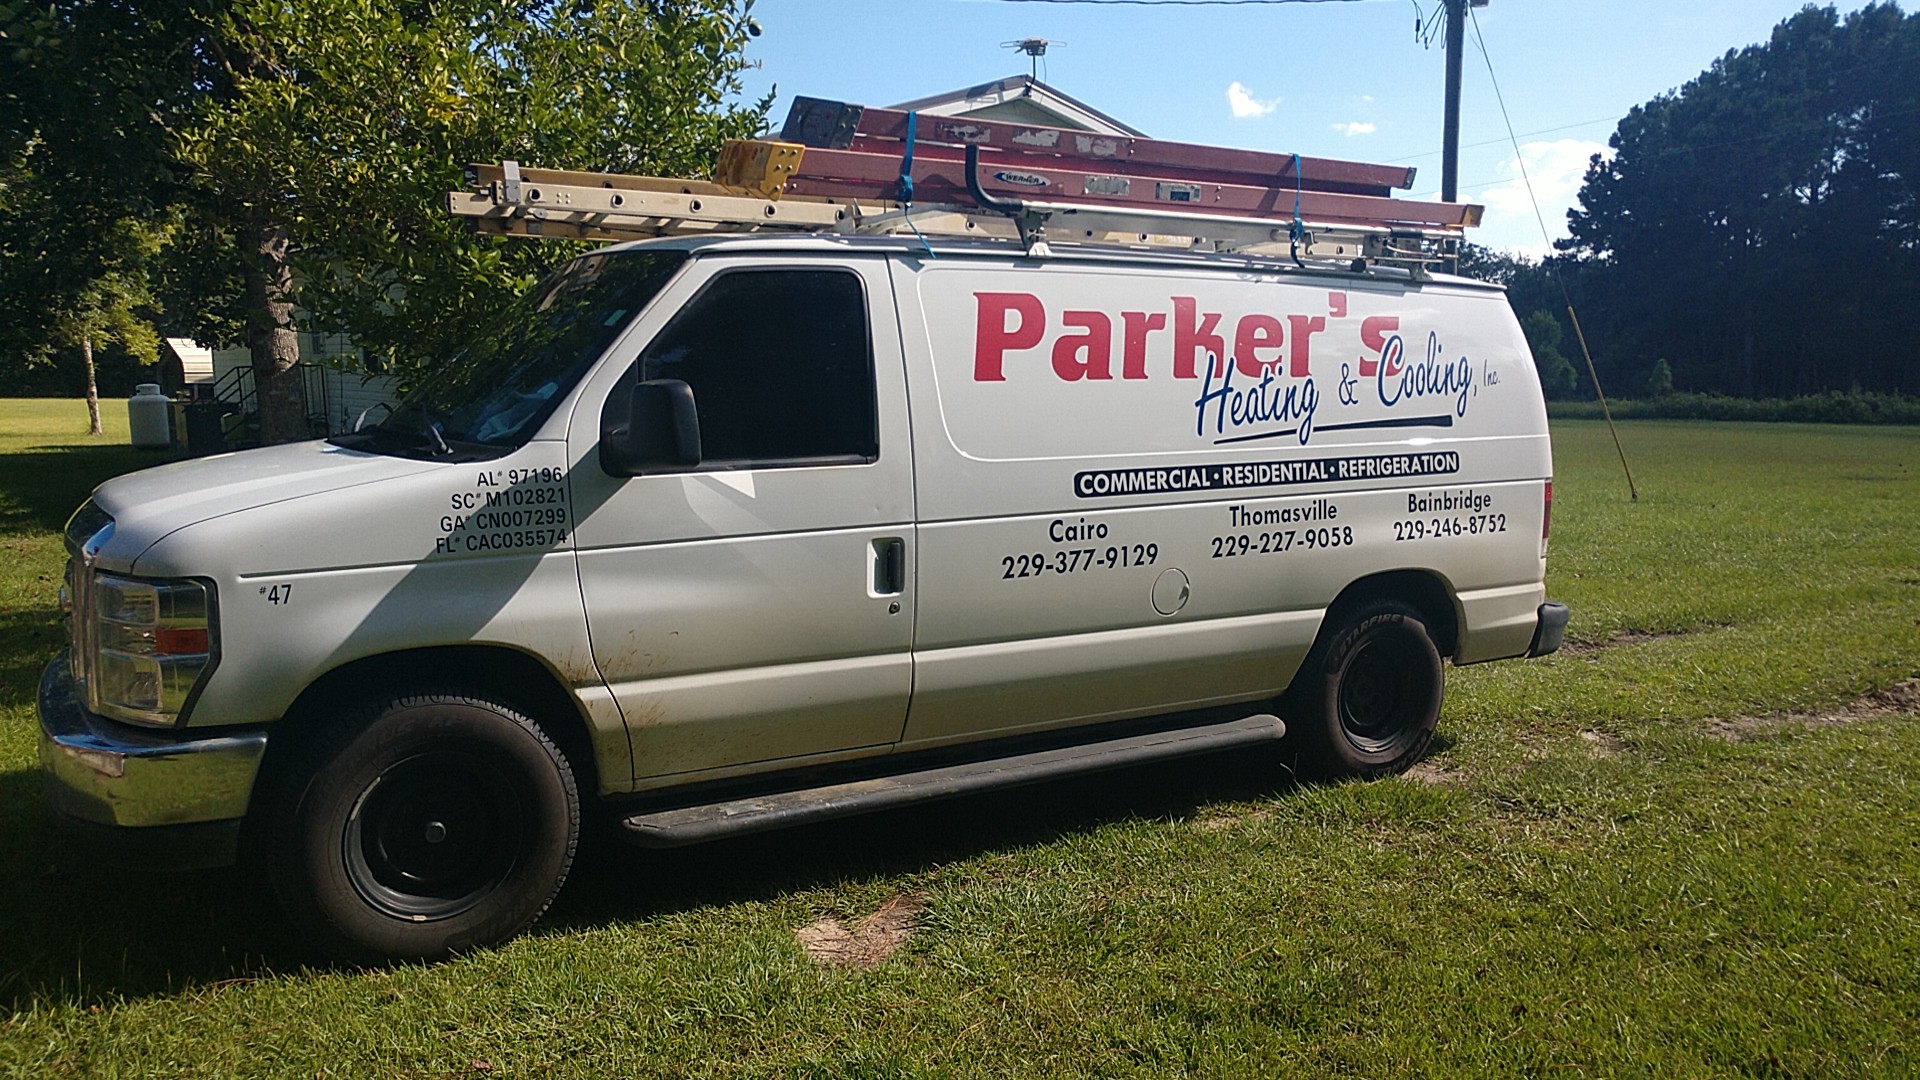 Parker's Heating & Cooling Inc 2903 US-84, Cairo Georgia 39828